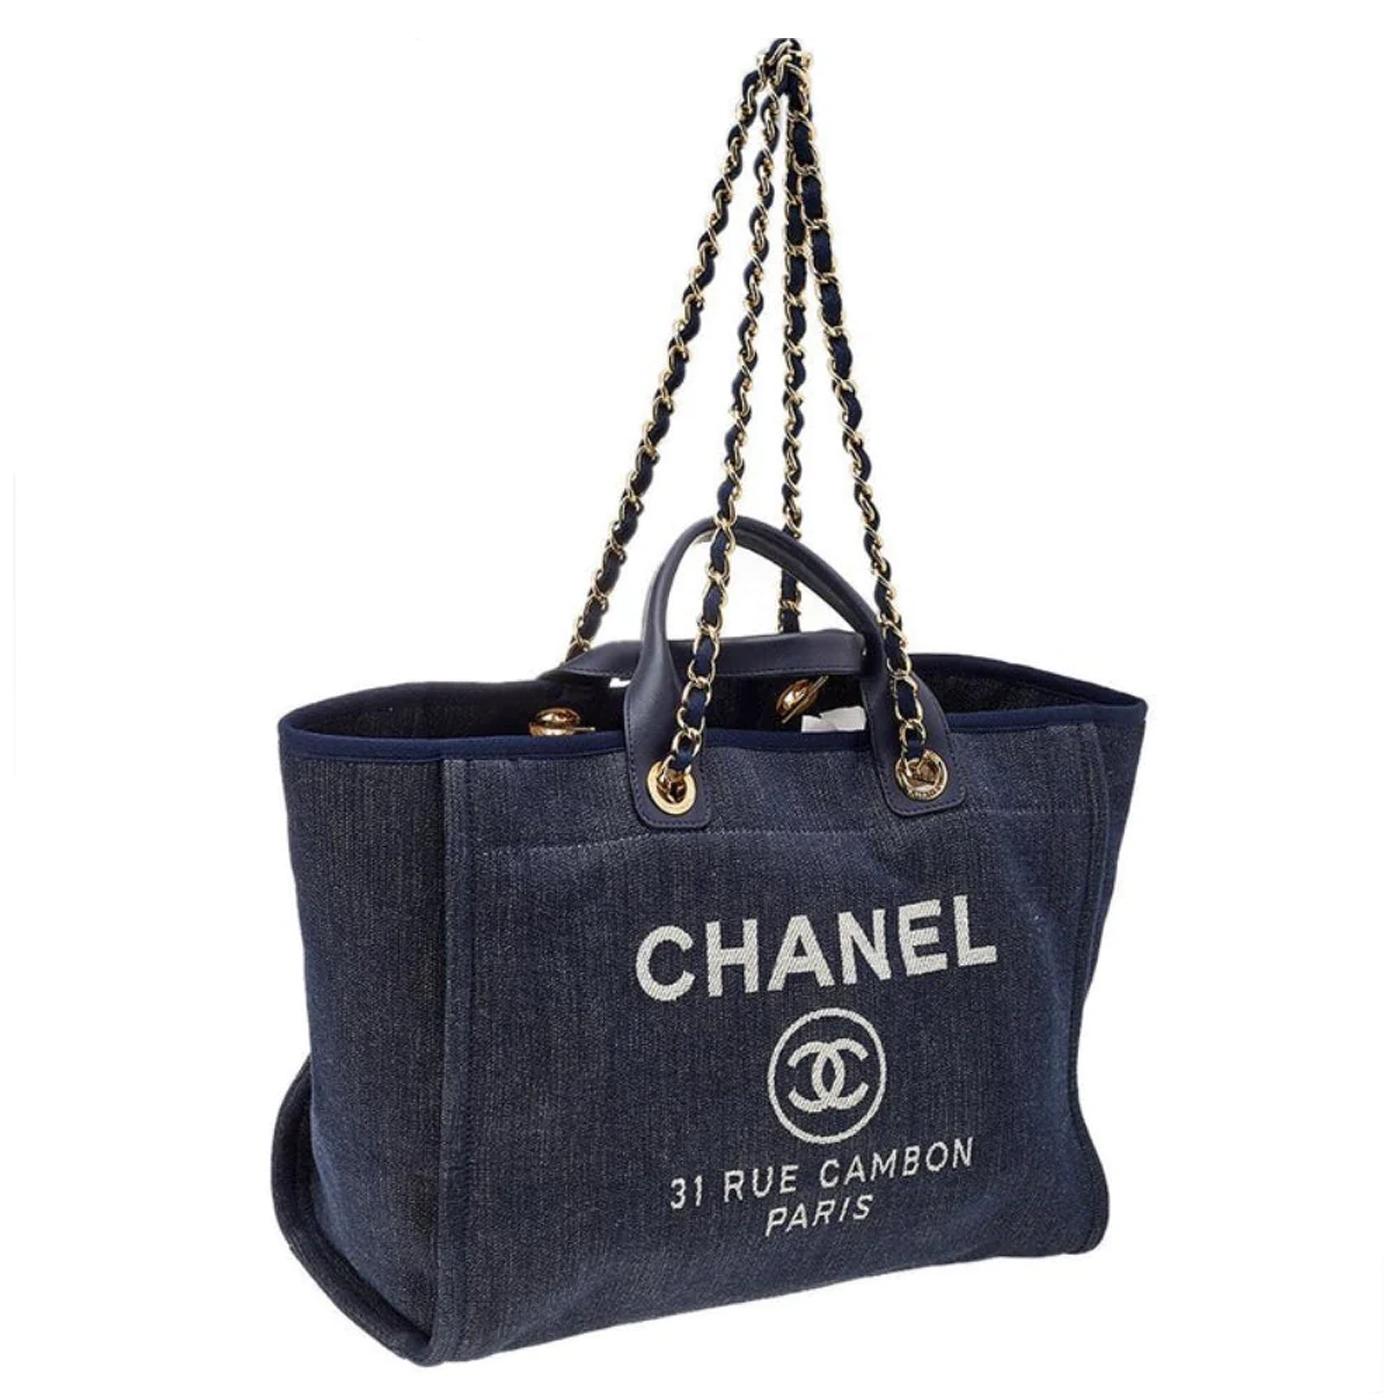 This bag features Chanel logos and the street name of Chanel's famous flagship store, 